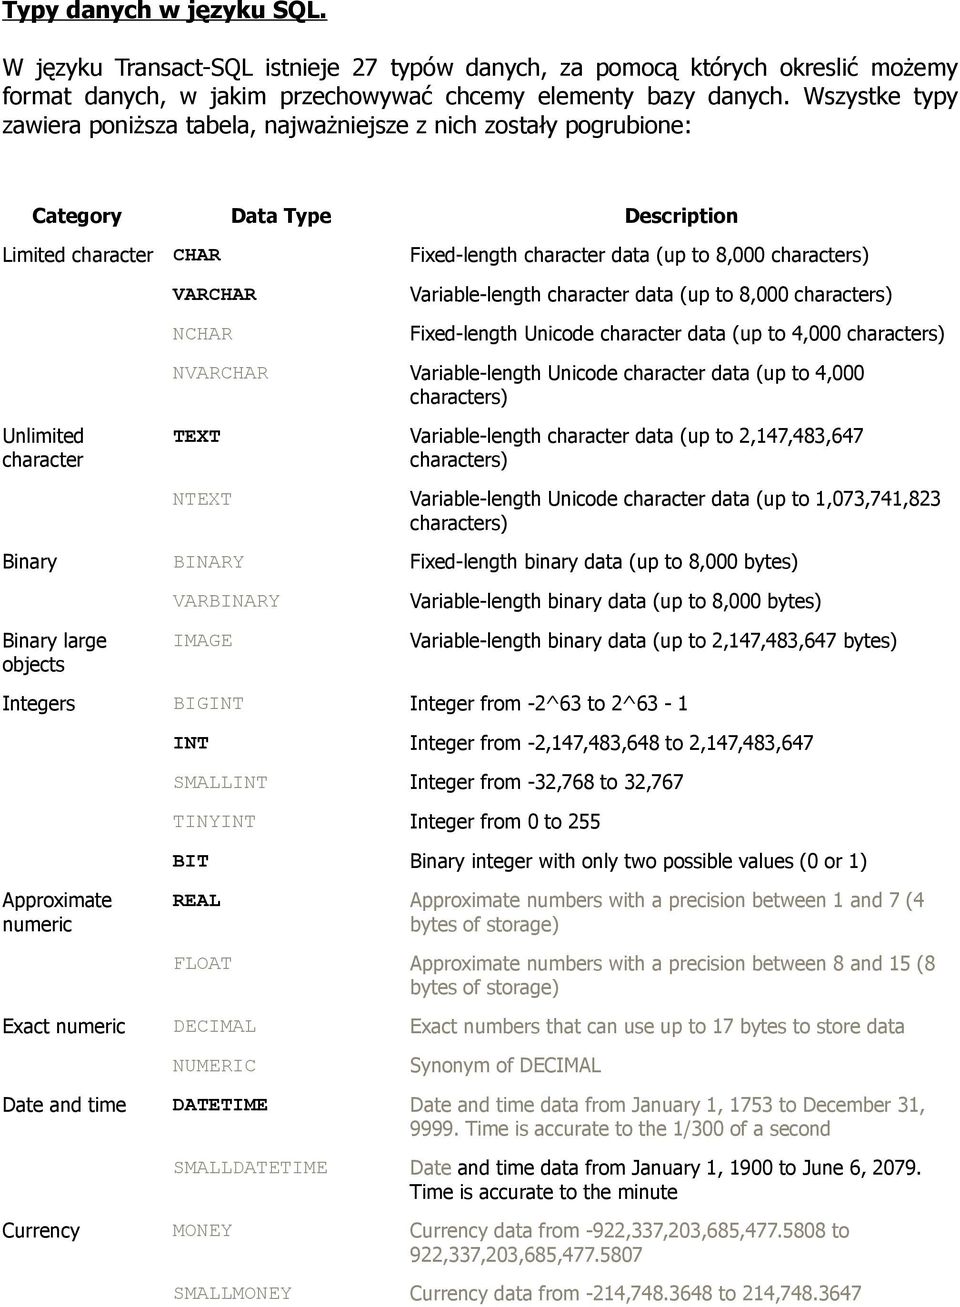 Variable-length character data (up to 8,000 Fixed-length Unicode character data (up to 4,000 NVARCHAR Variable-length Unicode character data (up to 4,000 Unlimited character TEXT Variable-length